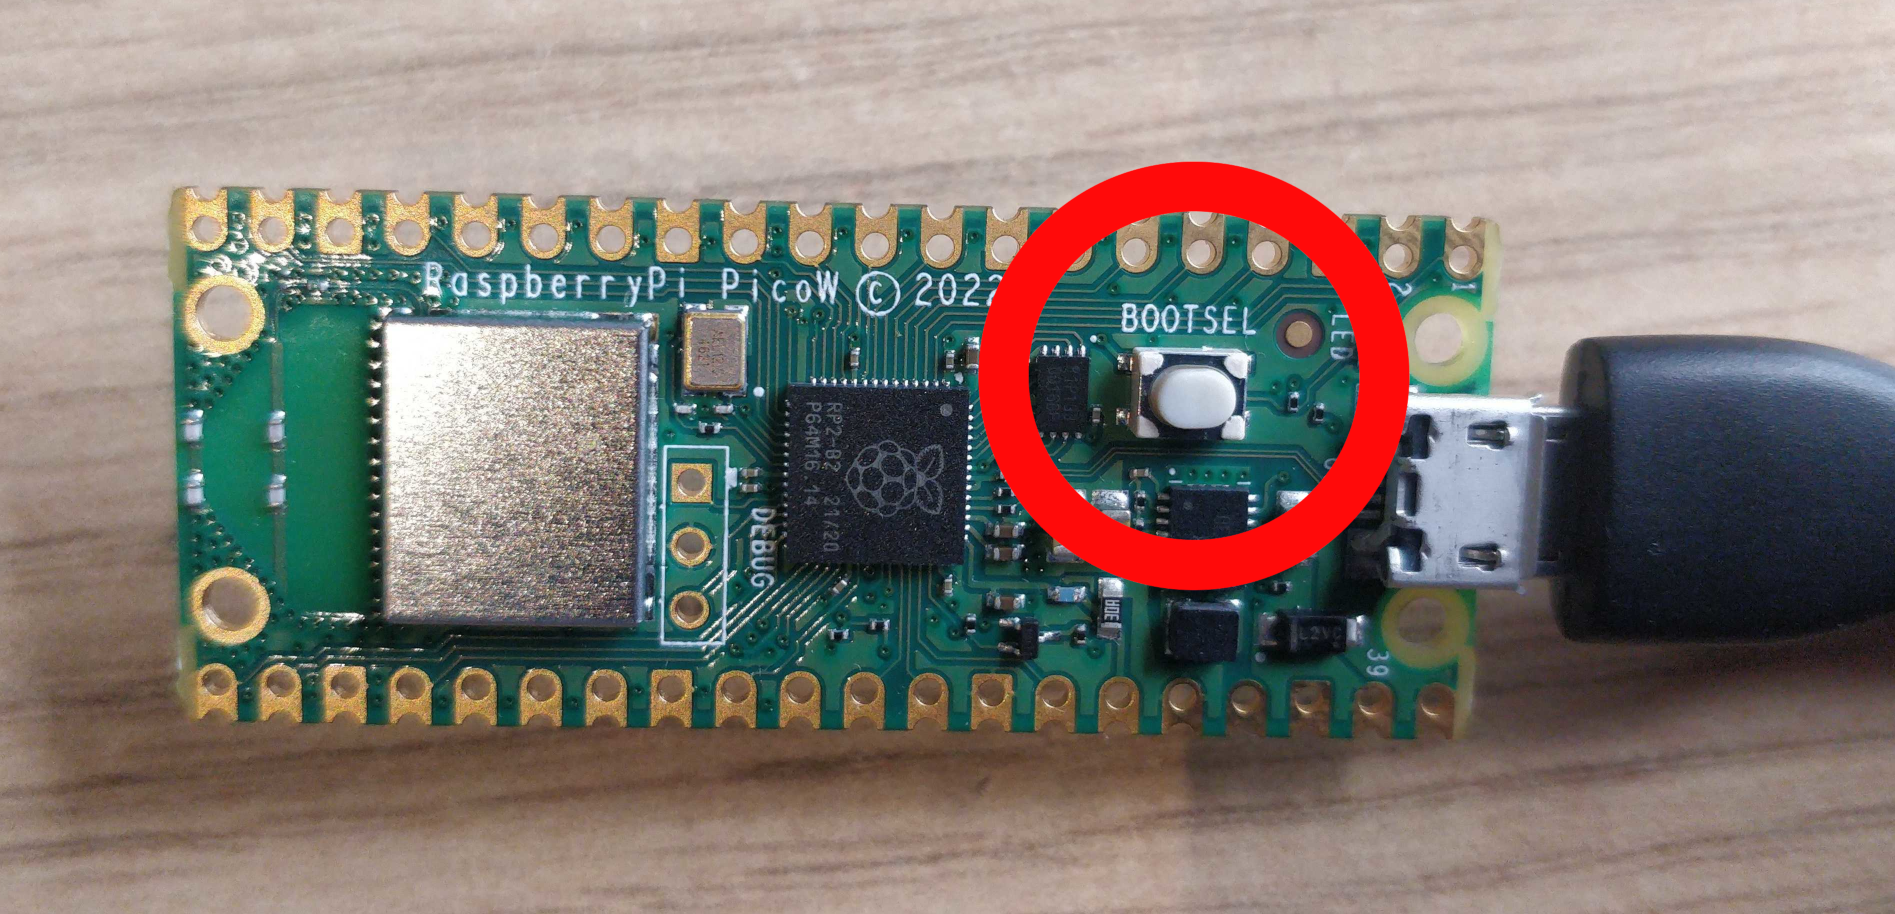 A photo of a Pico W, with a red circle around the BOOTSEL button.